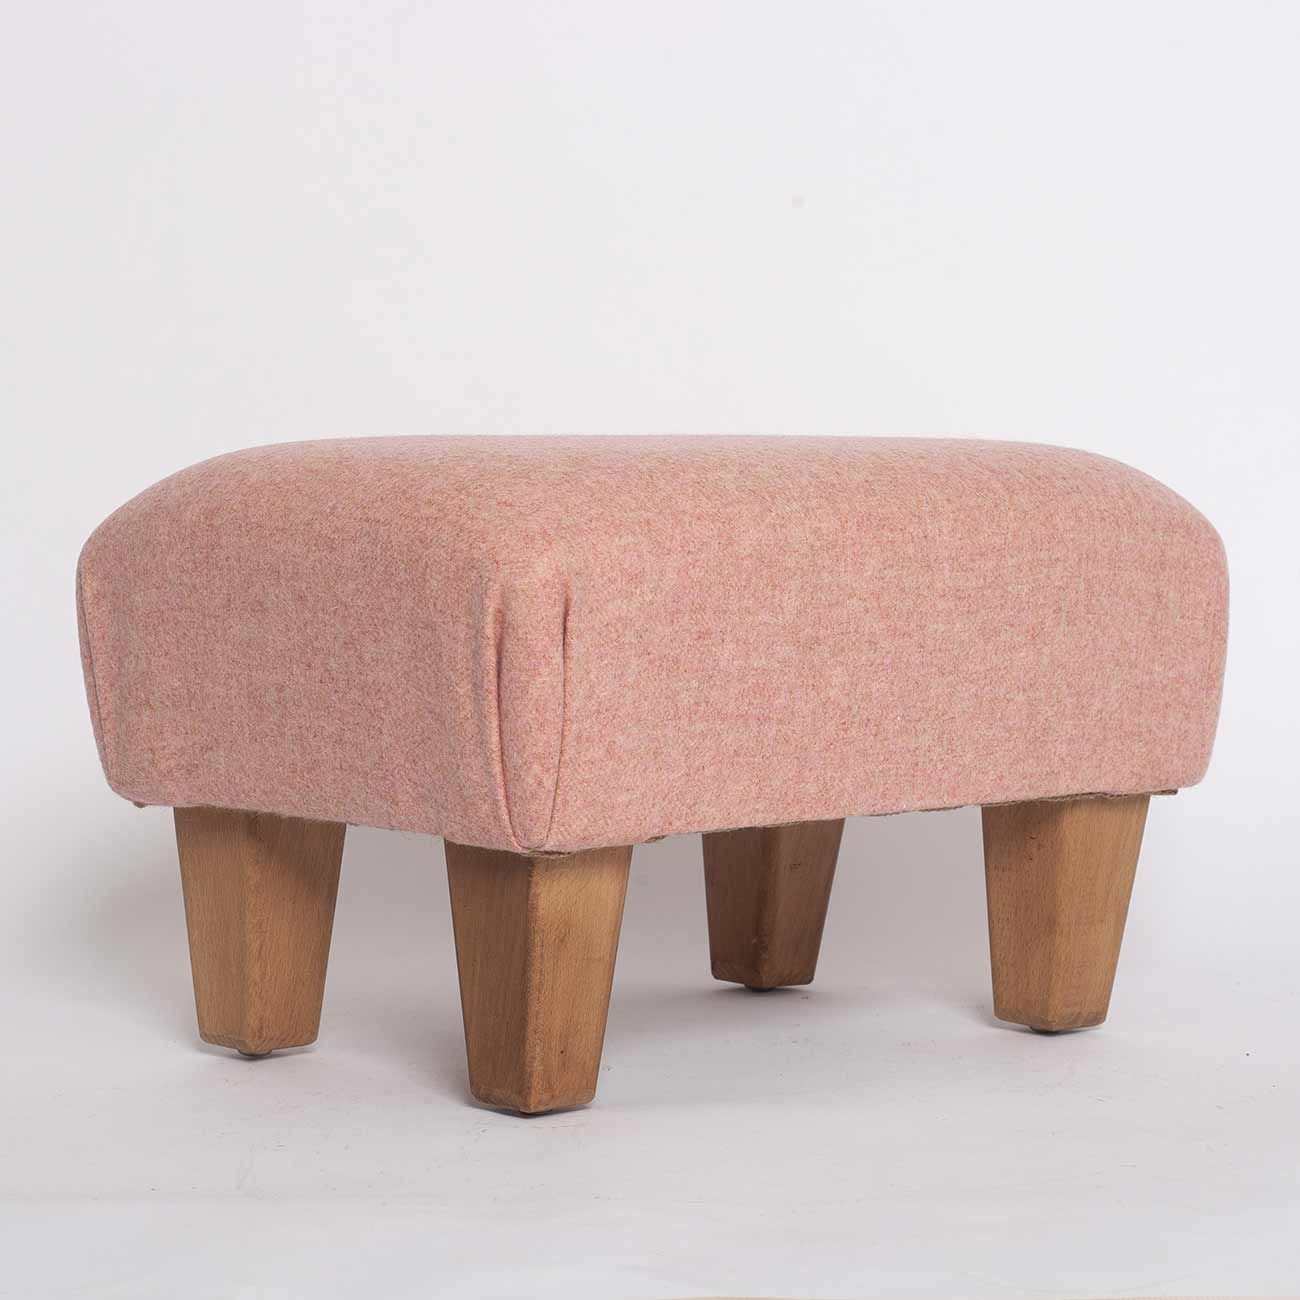 pink-fabric-footstool8 fabric from JLP